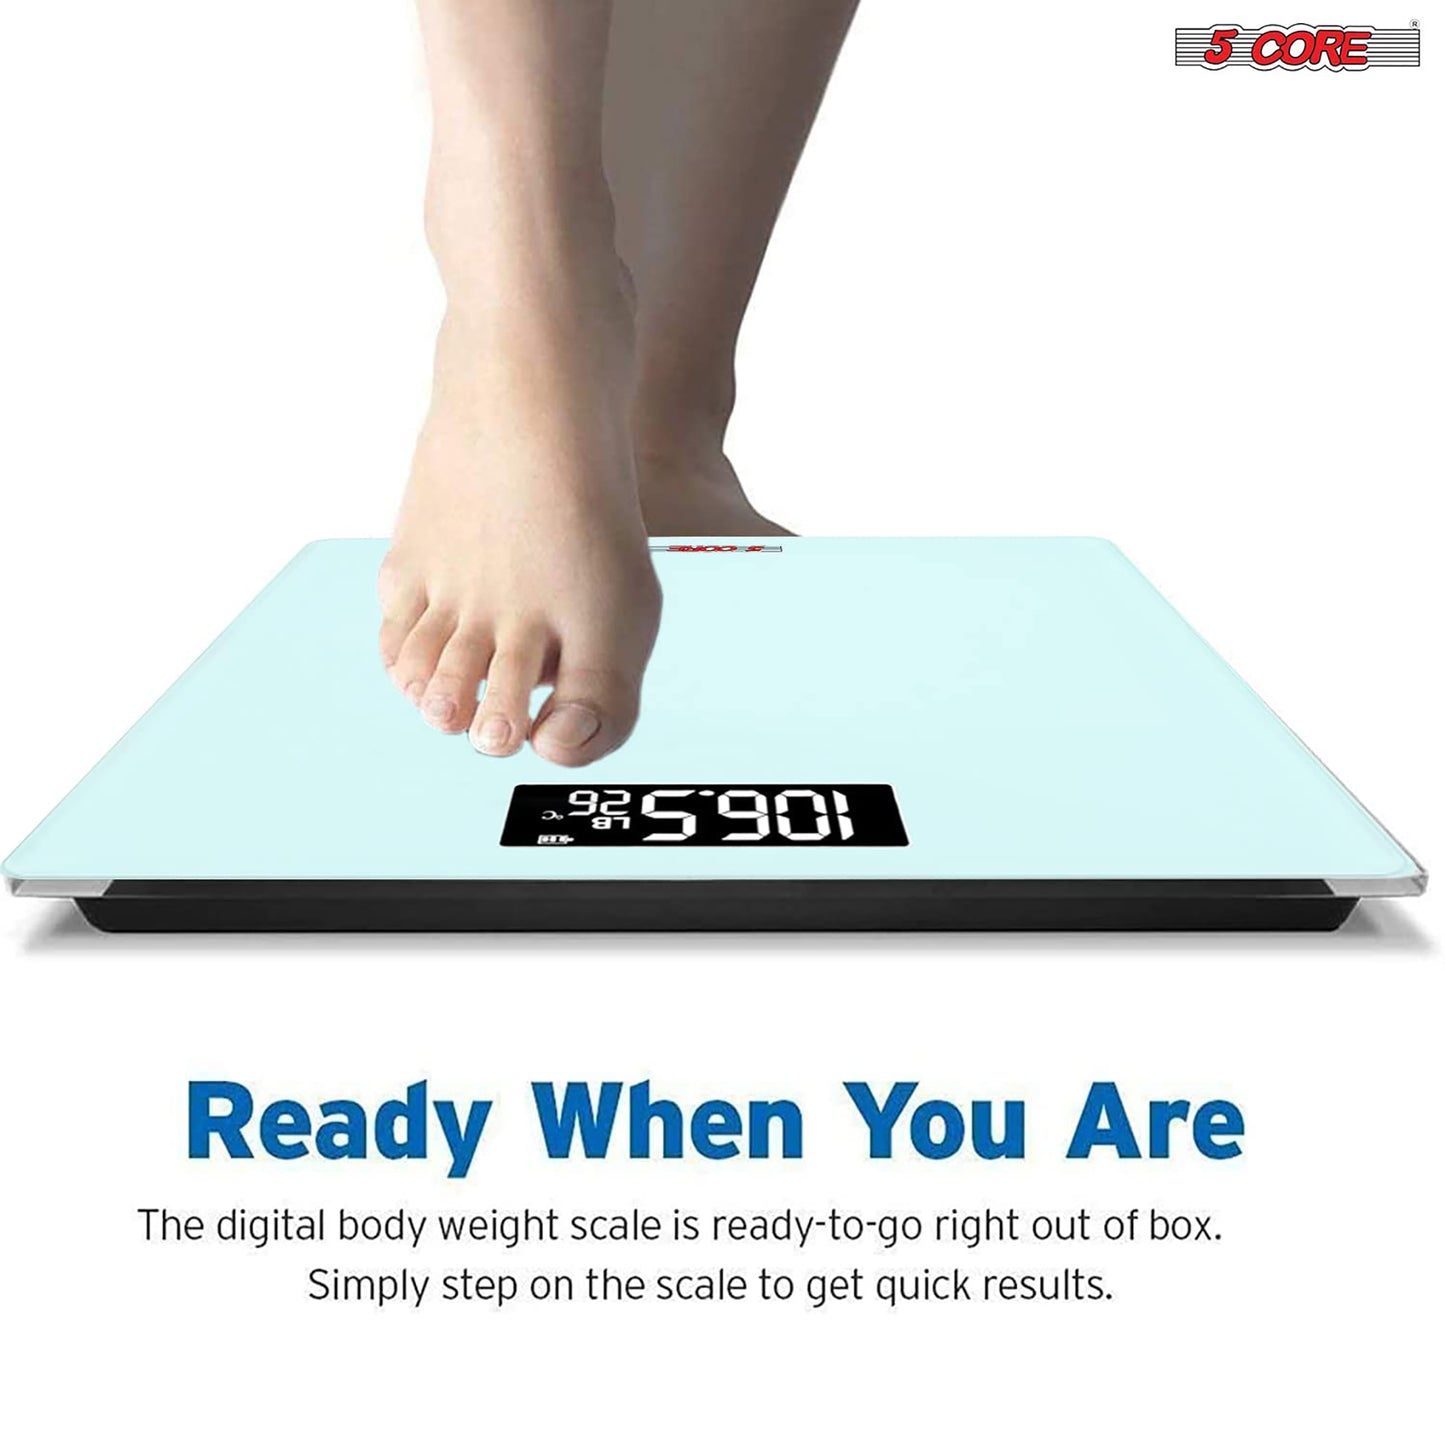 Kcubeinc Digital Scale for Body Weight, Precision Bathroom Weighing Bath Scale, Step-On Technology, High Capacity - 400 lbs. Large Display, Batteries Included BS 02 B WH